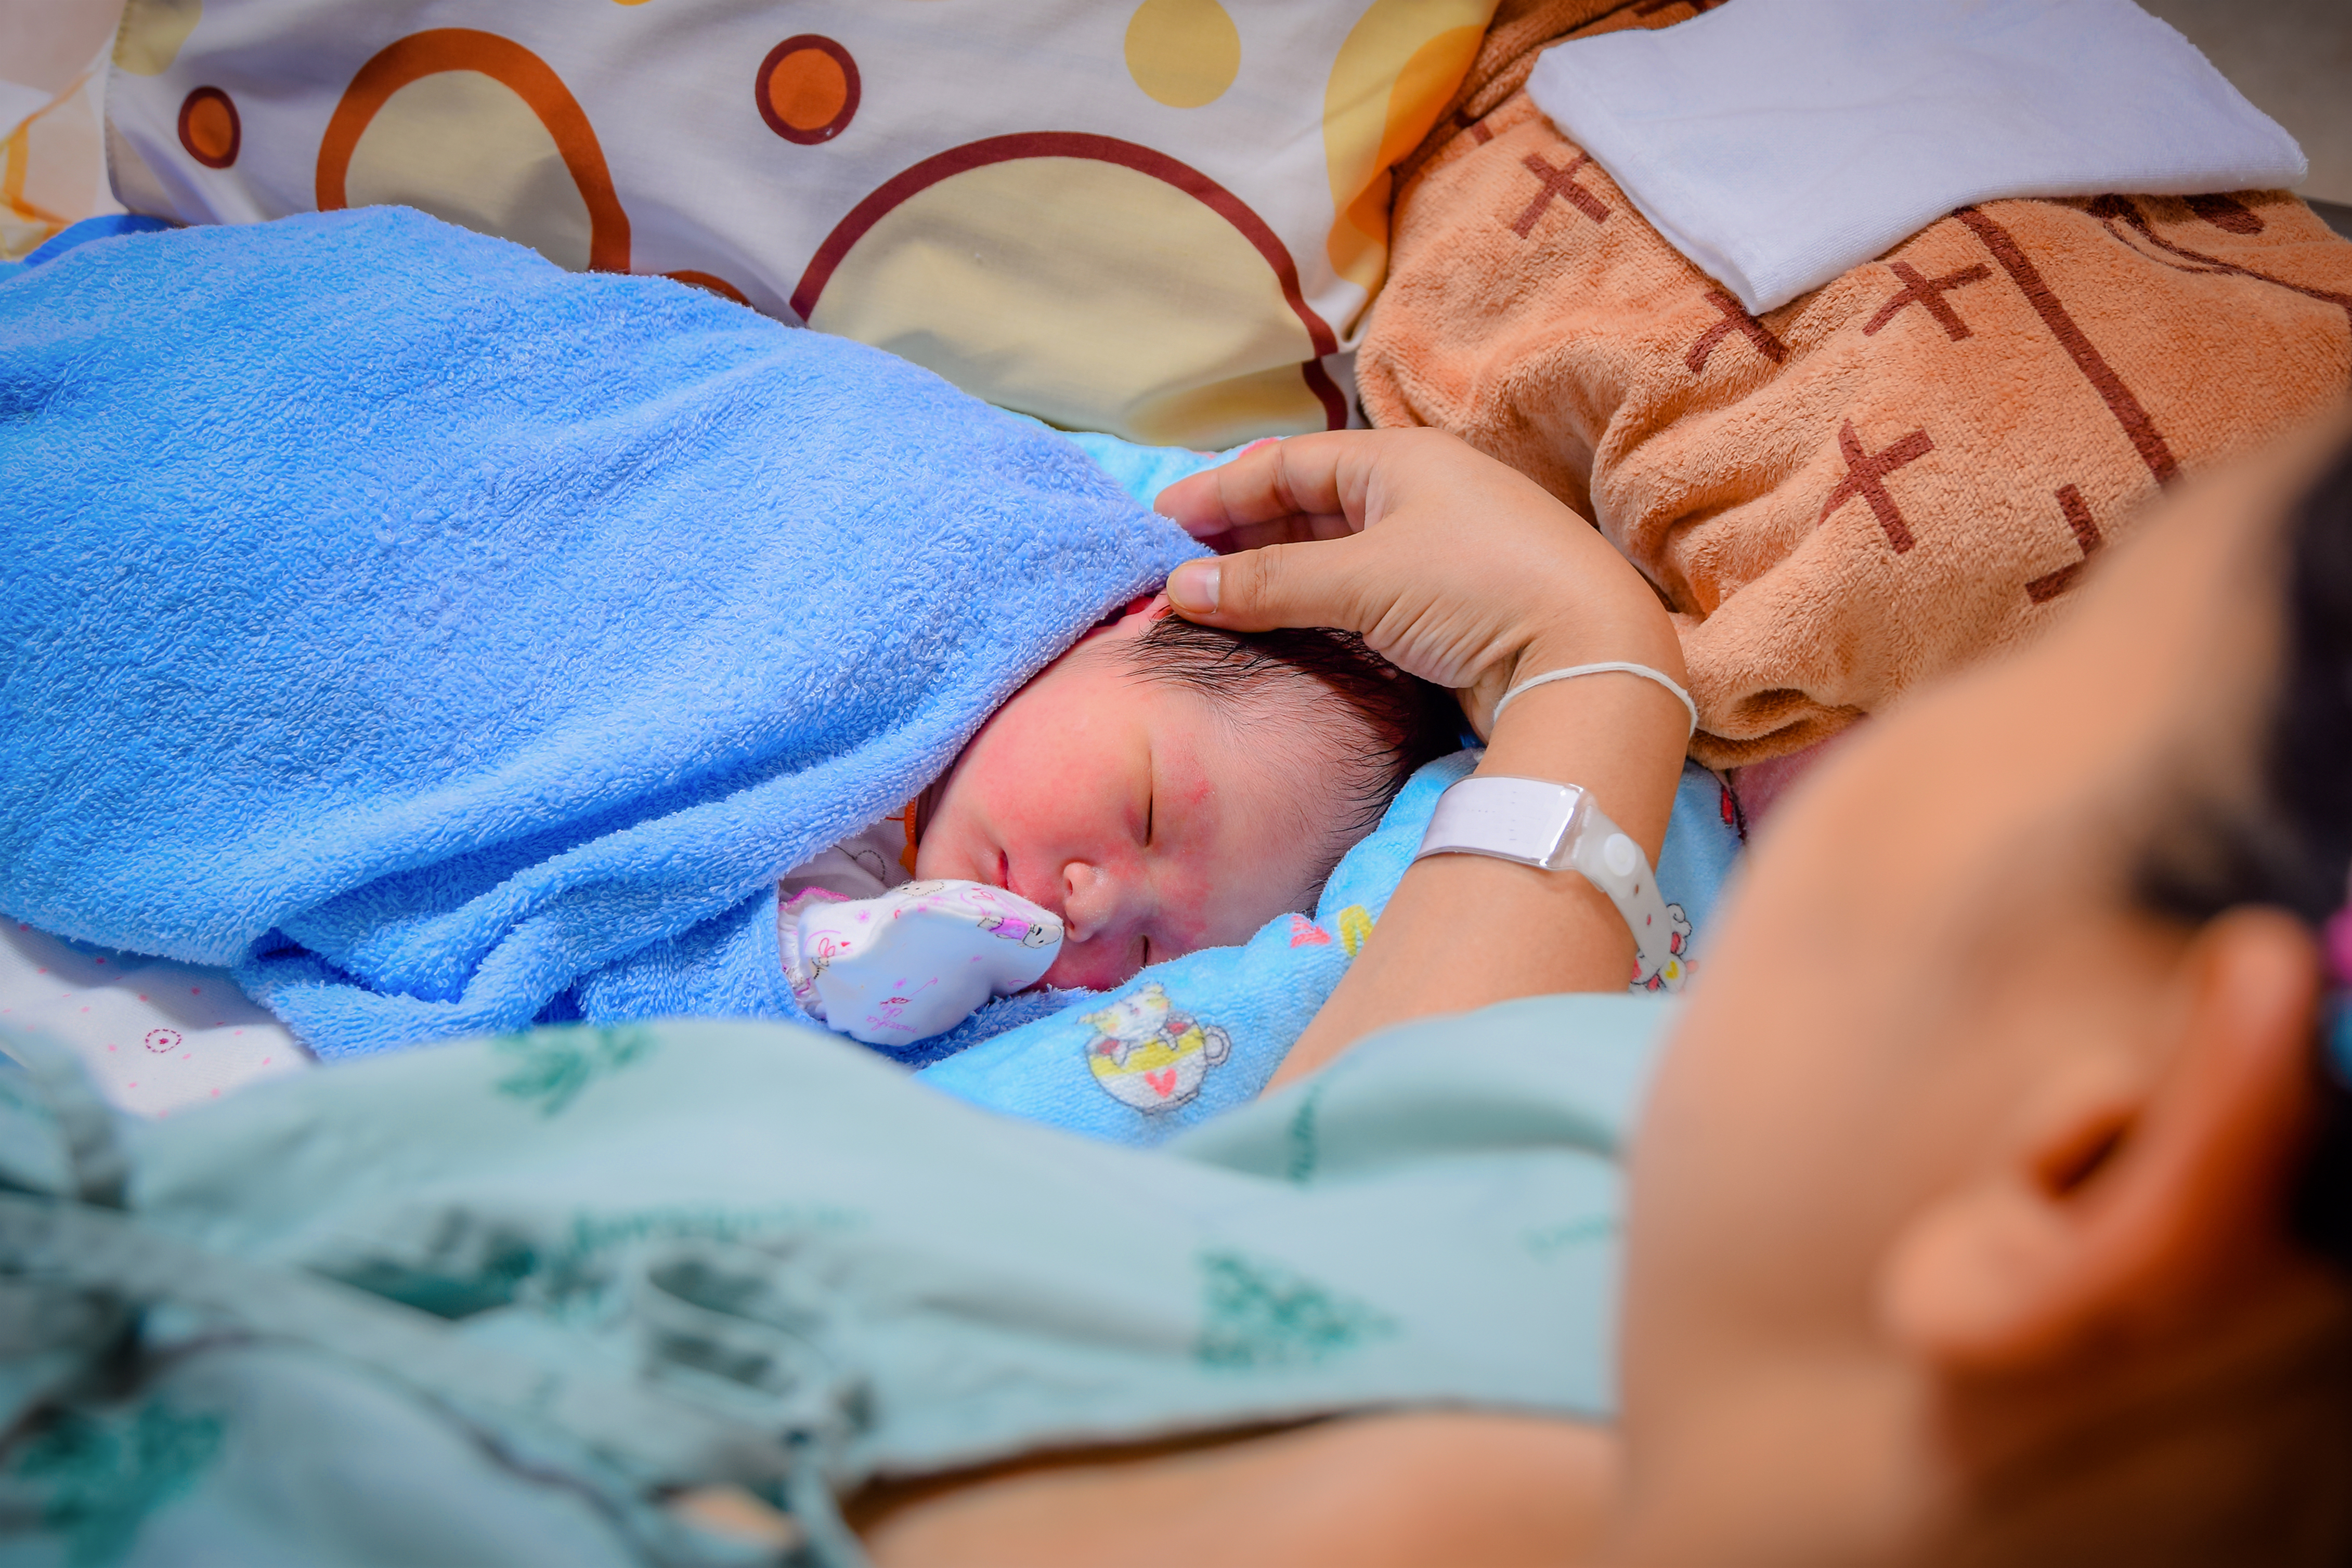 A woman with her newborn baby | Source: Shutterstock